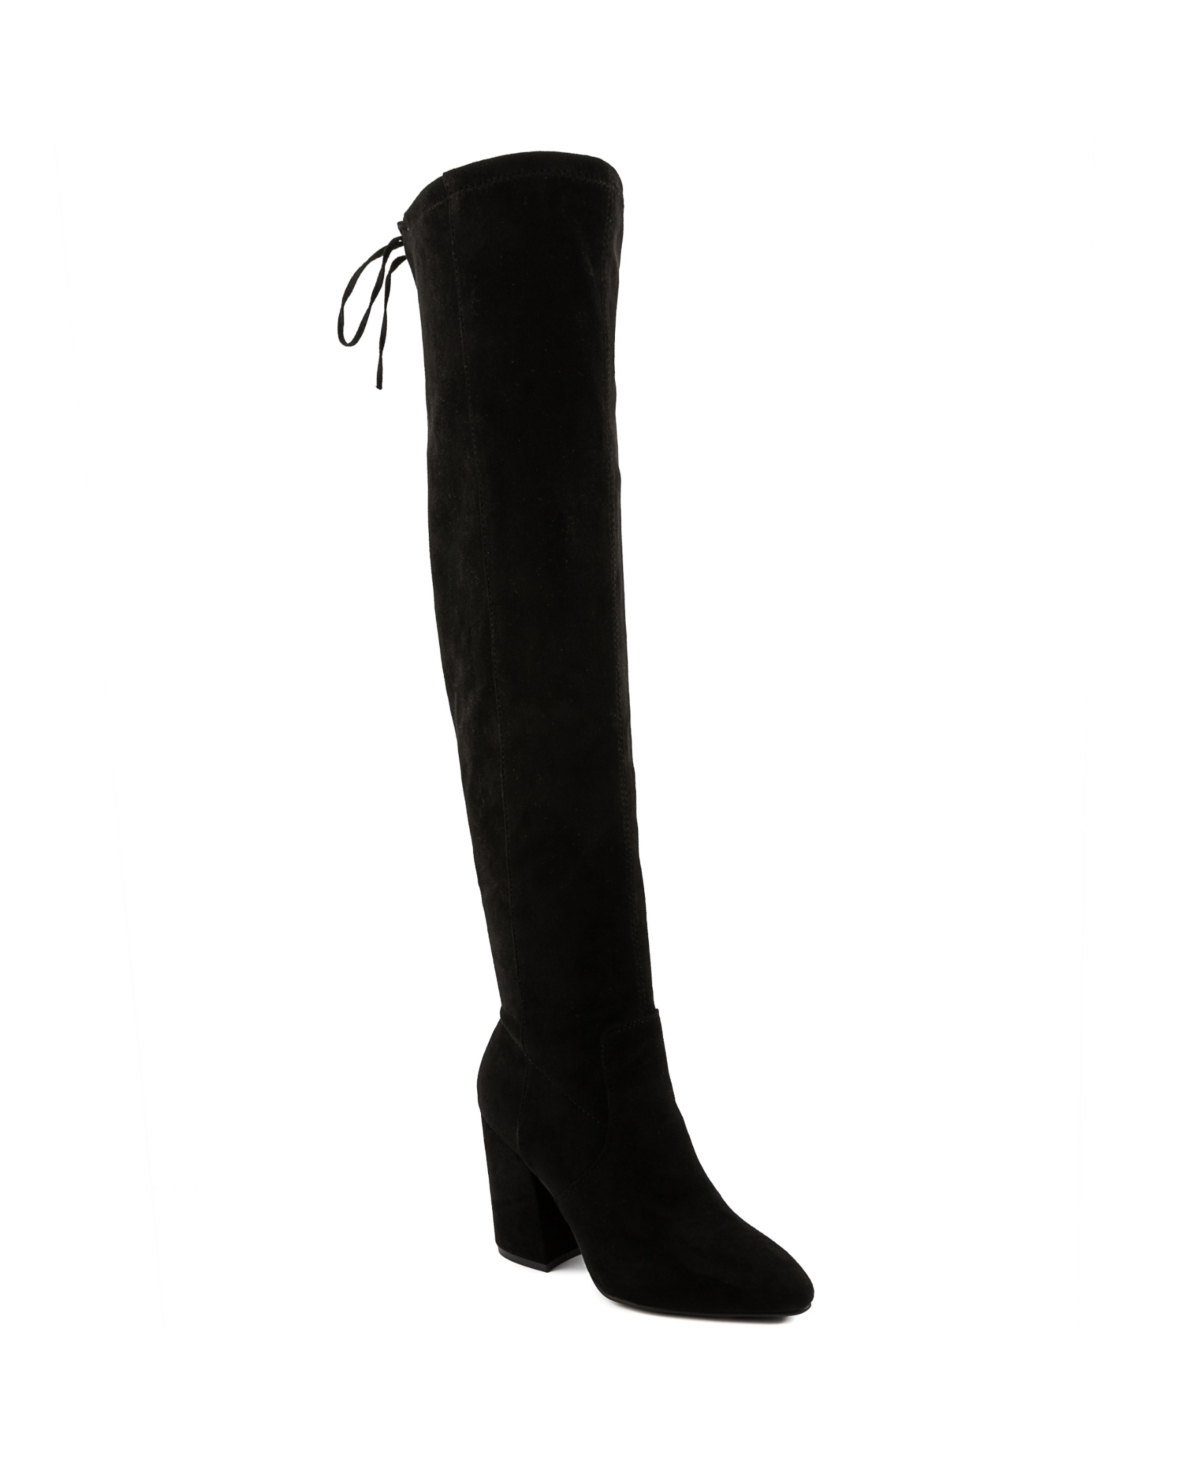 SUGAR WOMEN'S EVERS OVER THE KNEE BOOTS